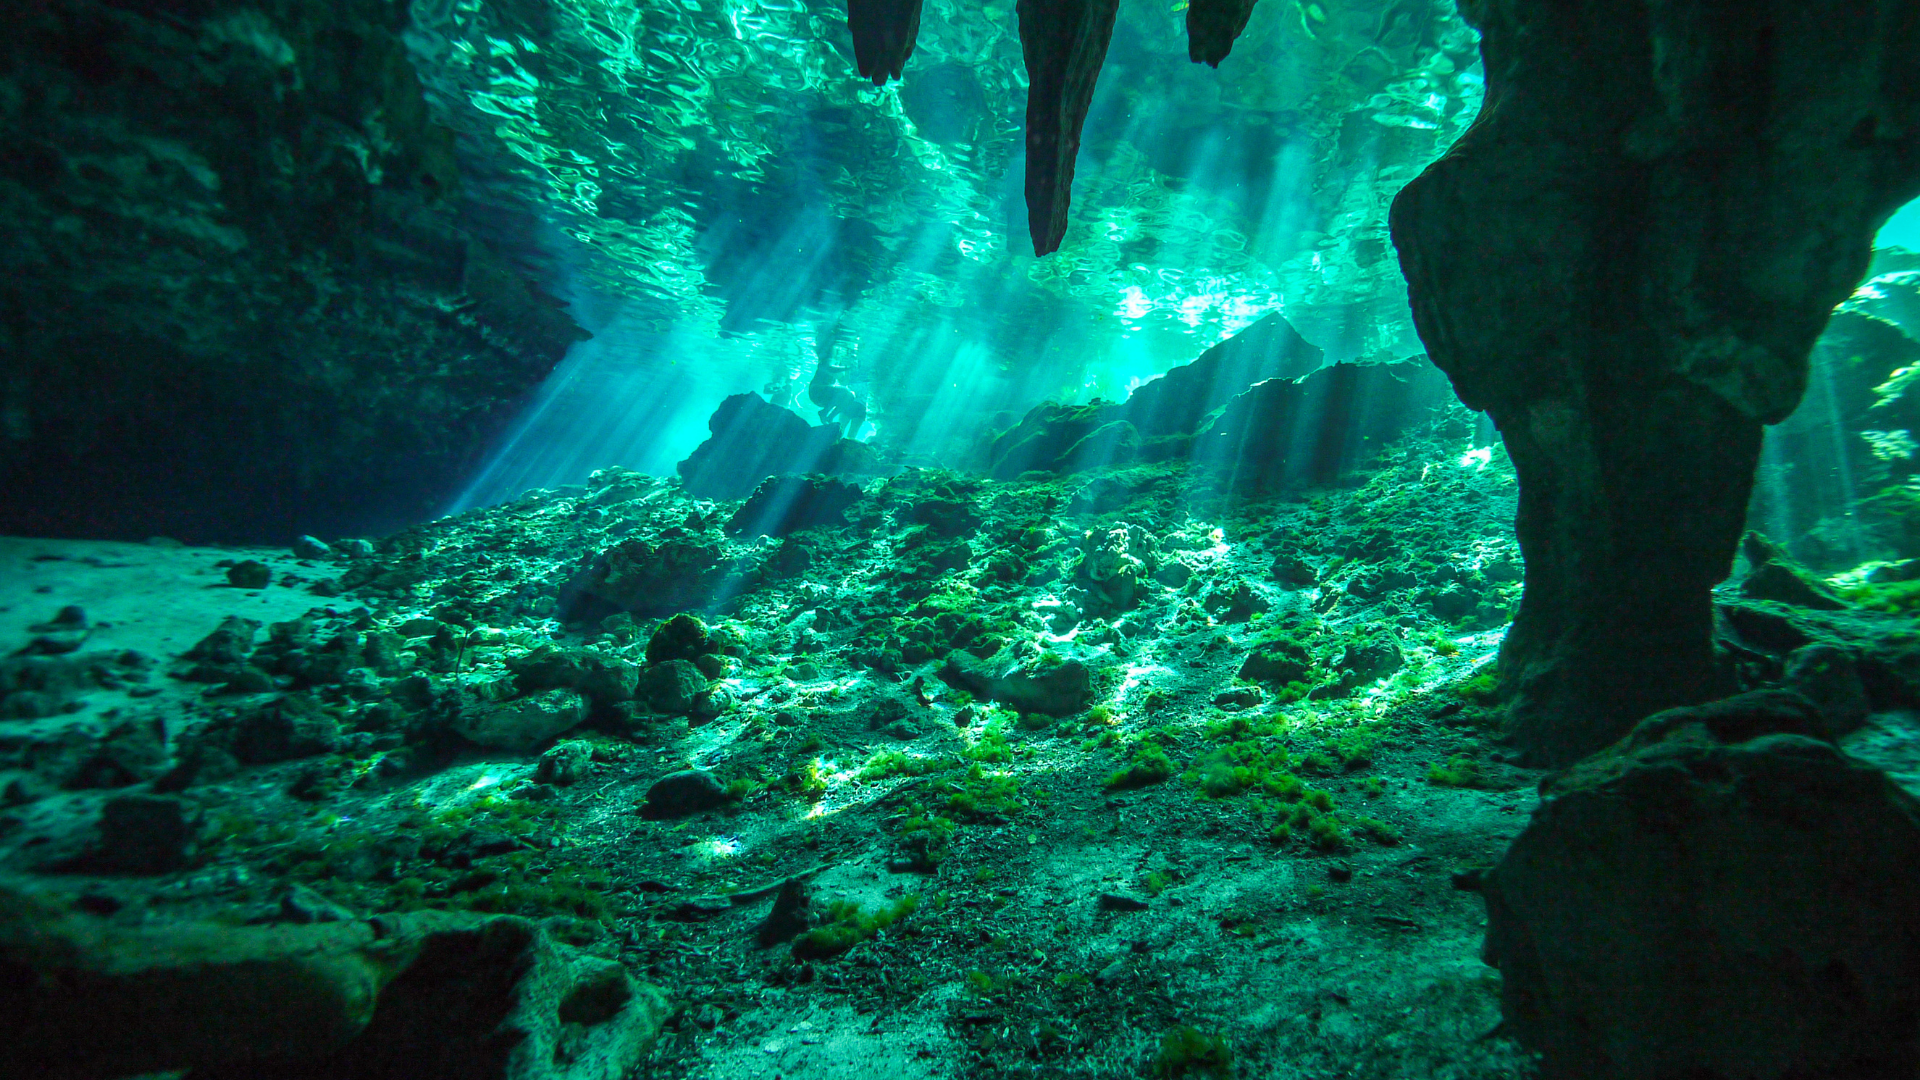 Underwater view of a cenote in Mexico